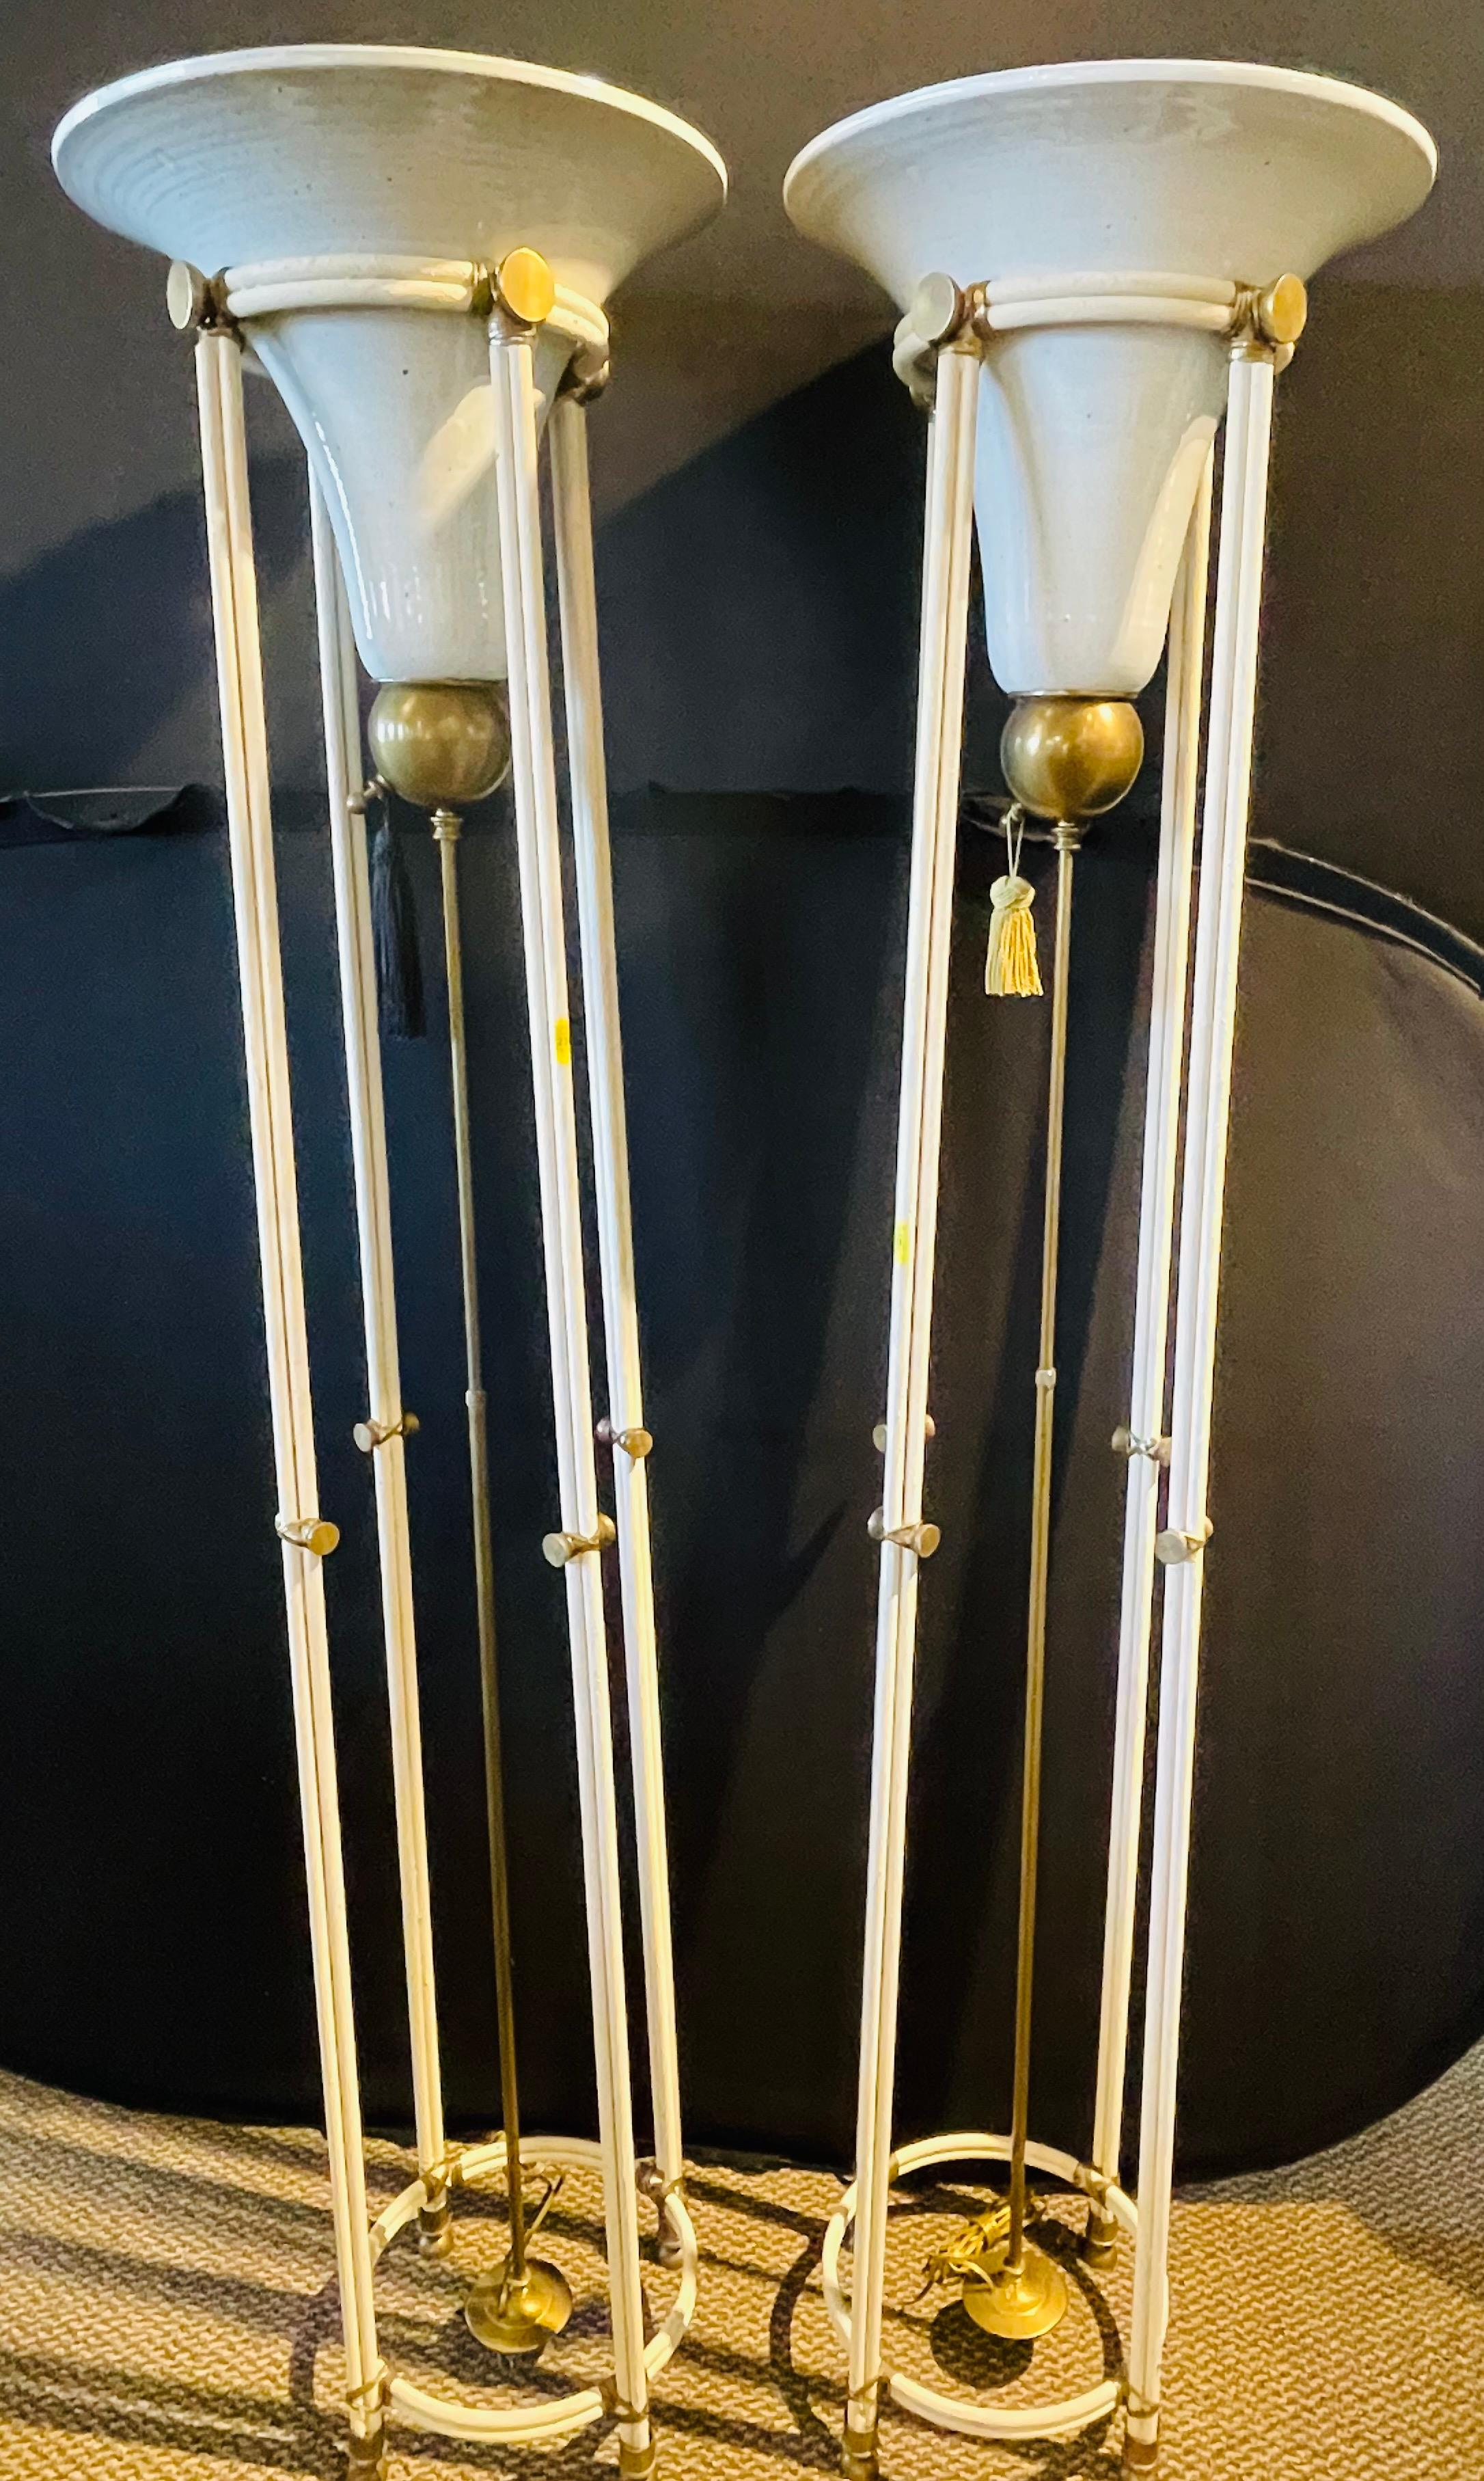 Mid-Century Modern, Torchiere Floor Lamps, White Porcelain, Bronze, France 1930s In Good Condition For Sale In Stamford, CT